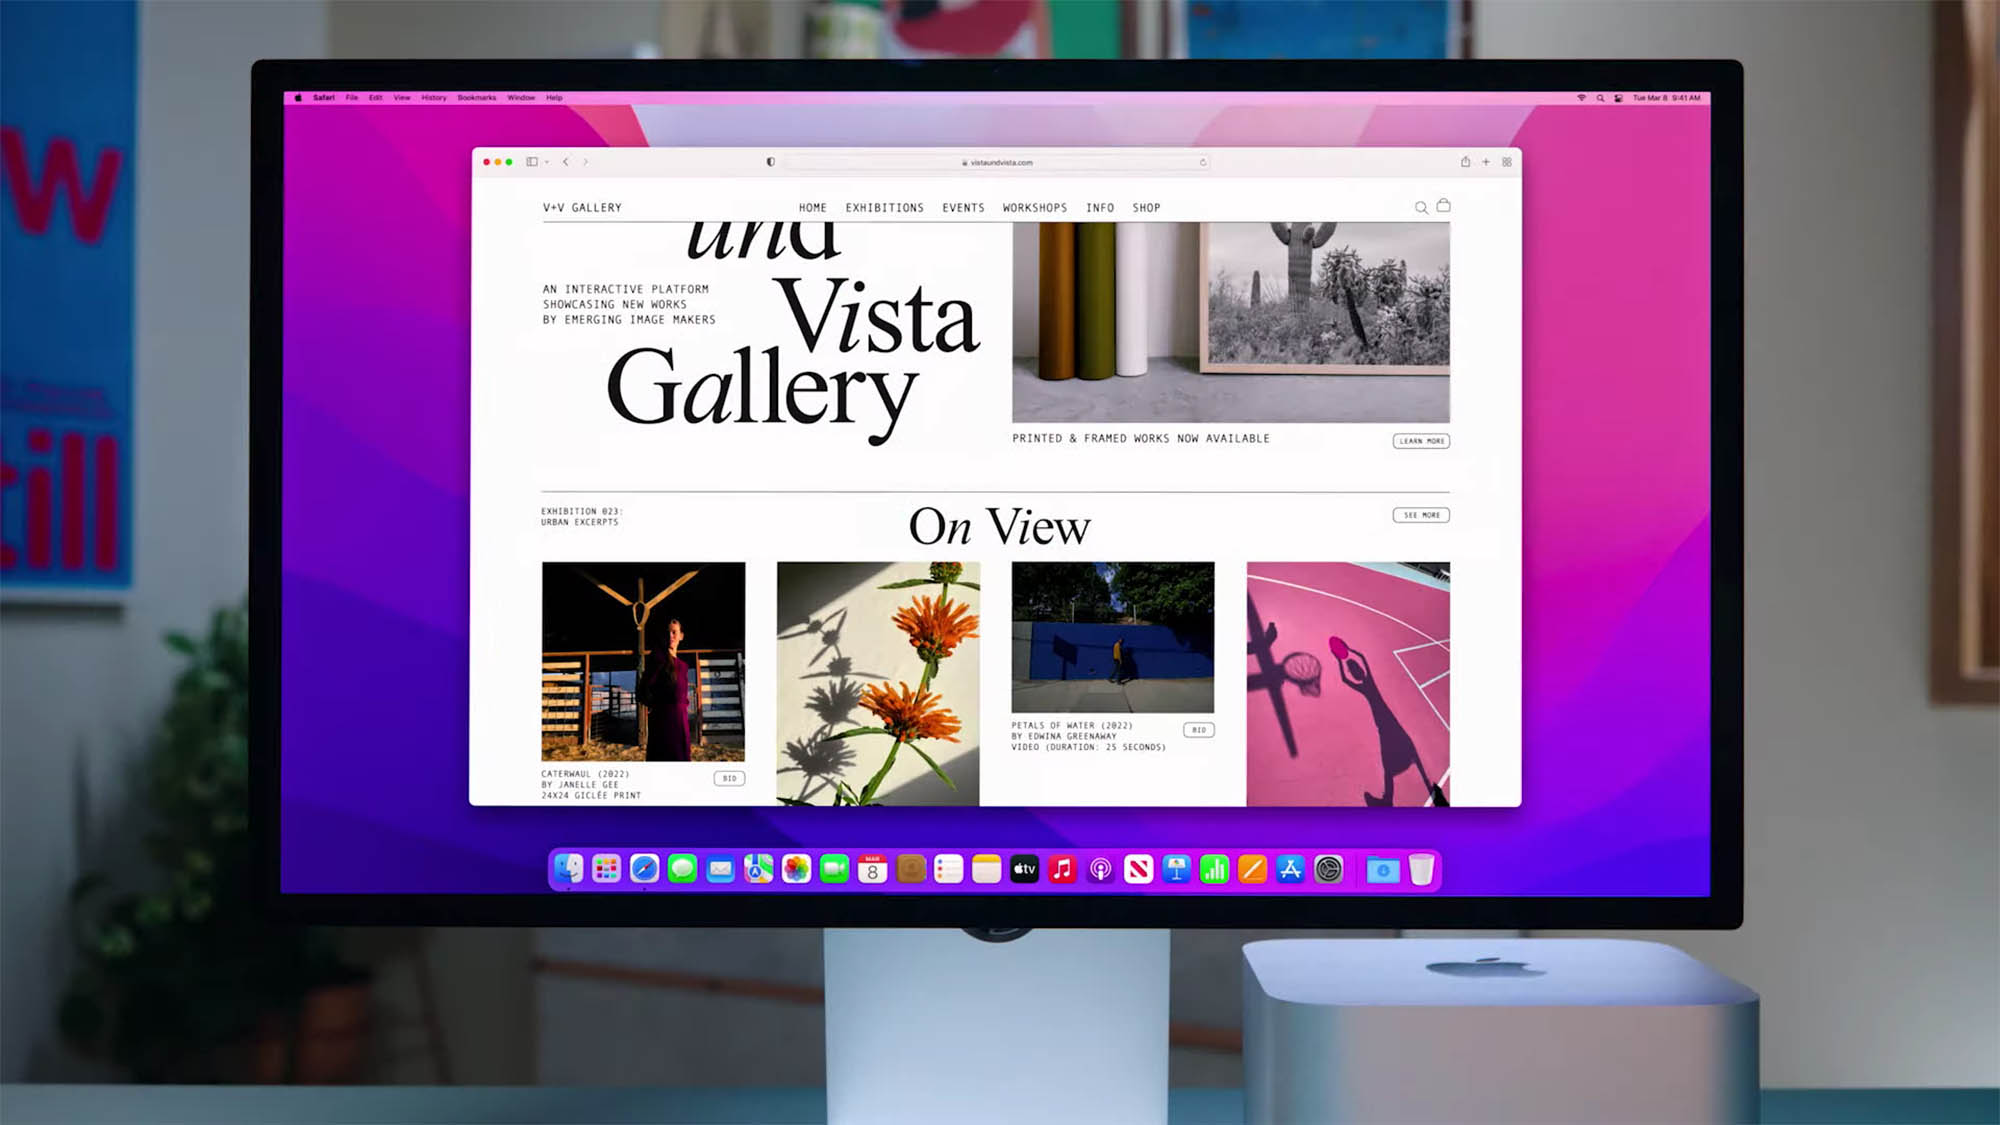 What to expect from Apple Studio Display Pro